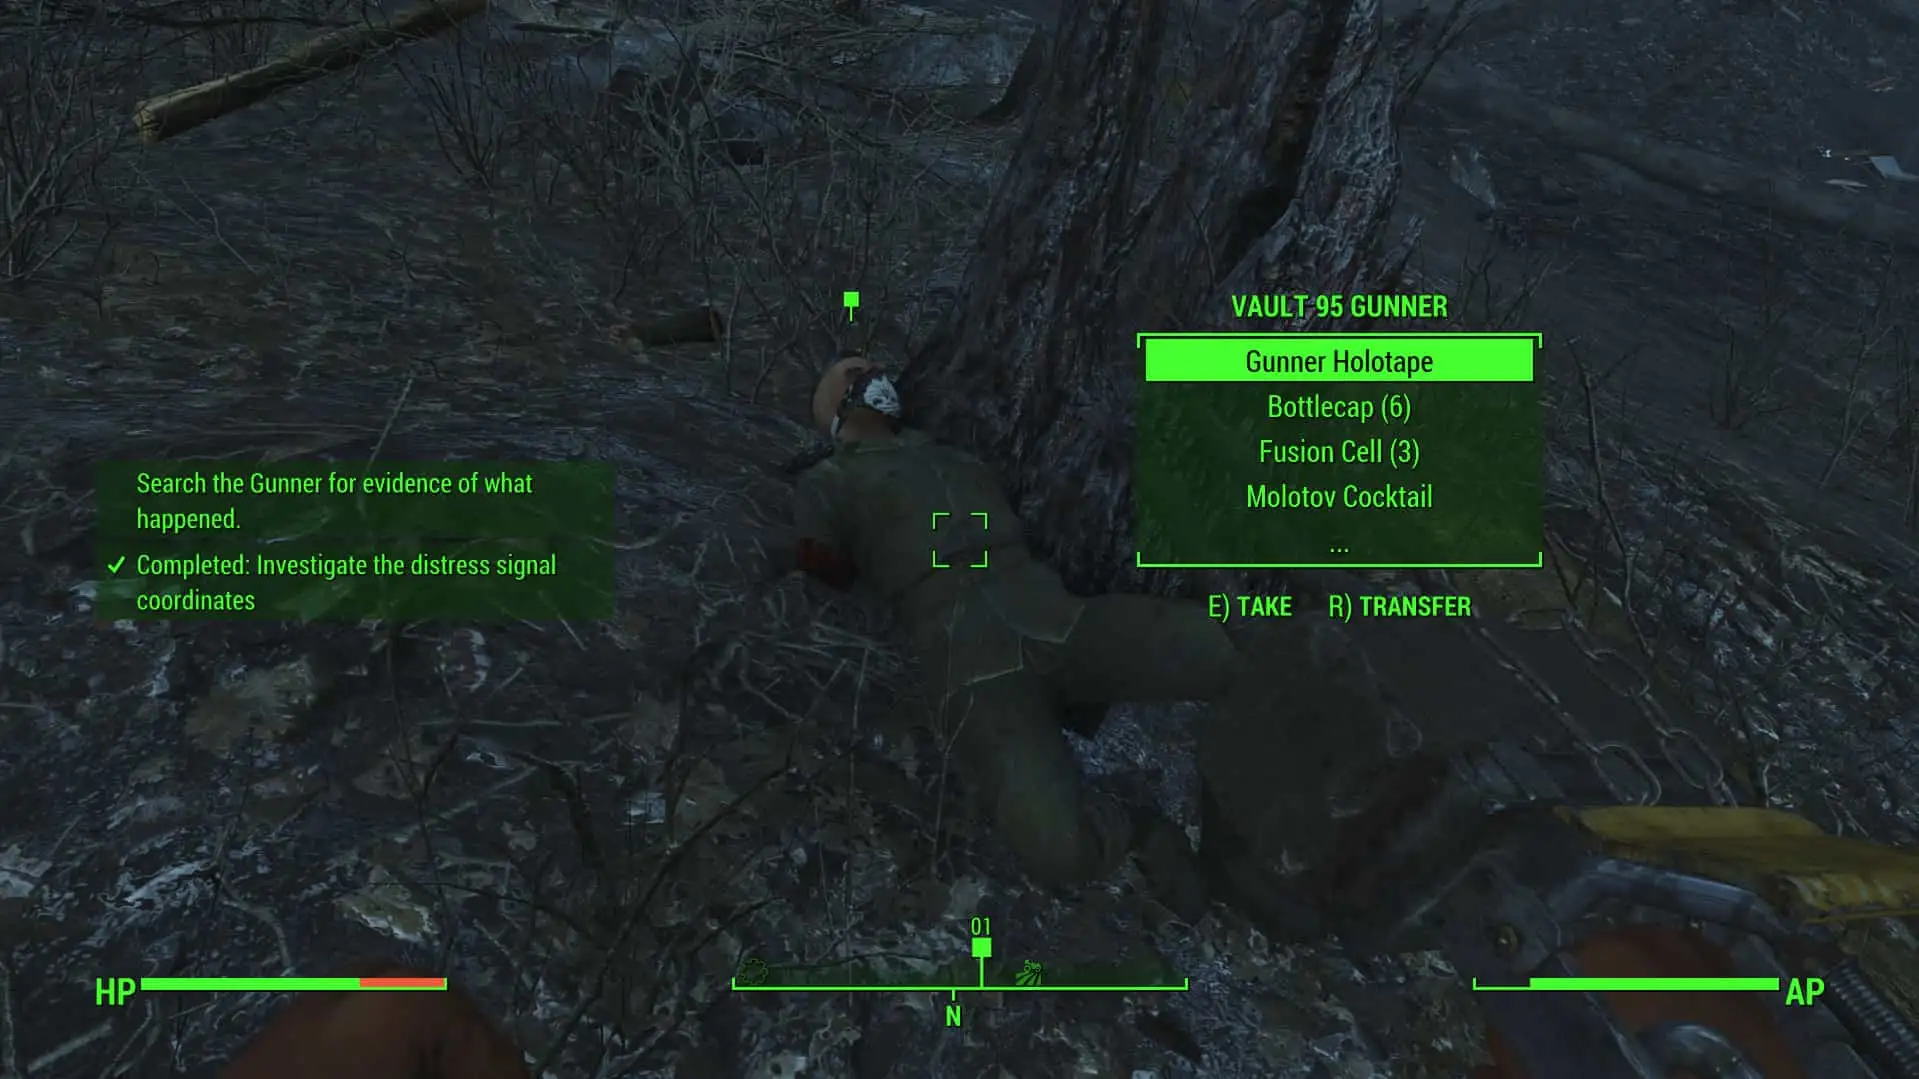 Fallout 4 Tesla Cannon: How to complete Best of Three quest